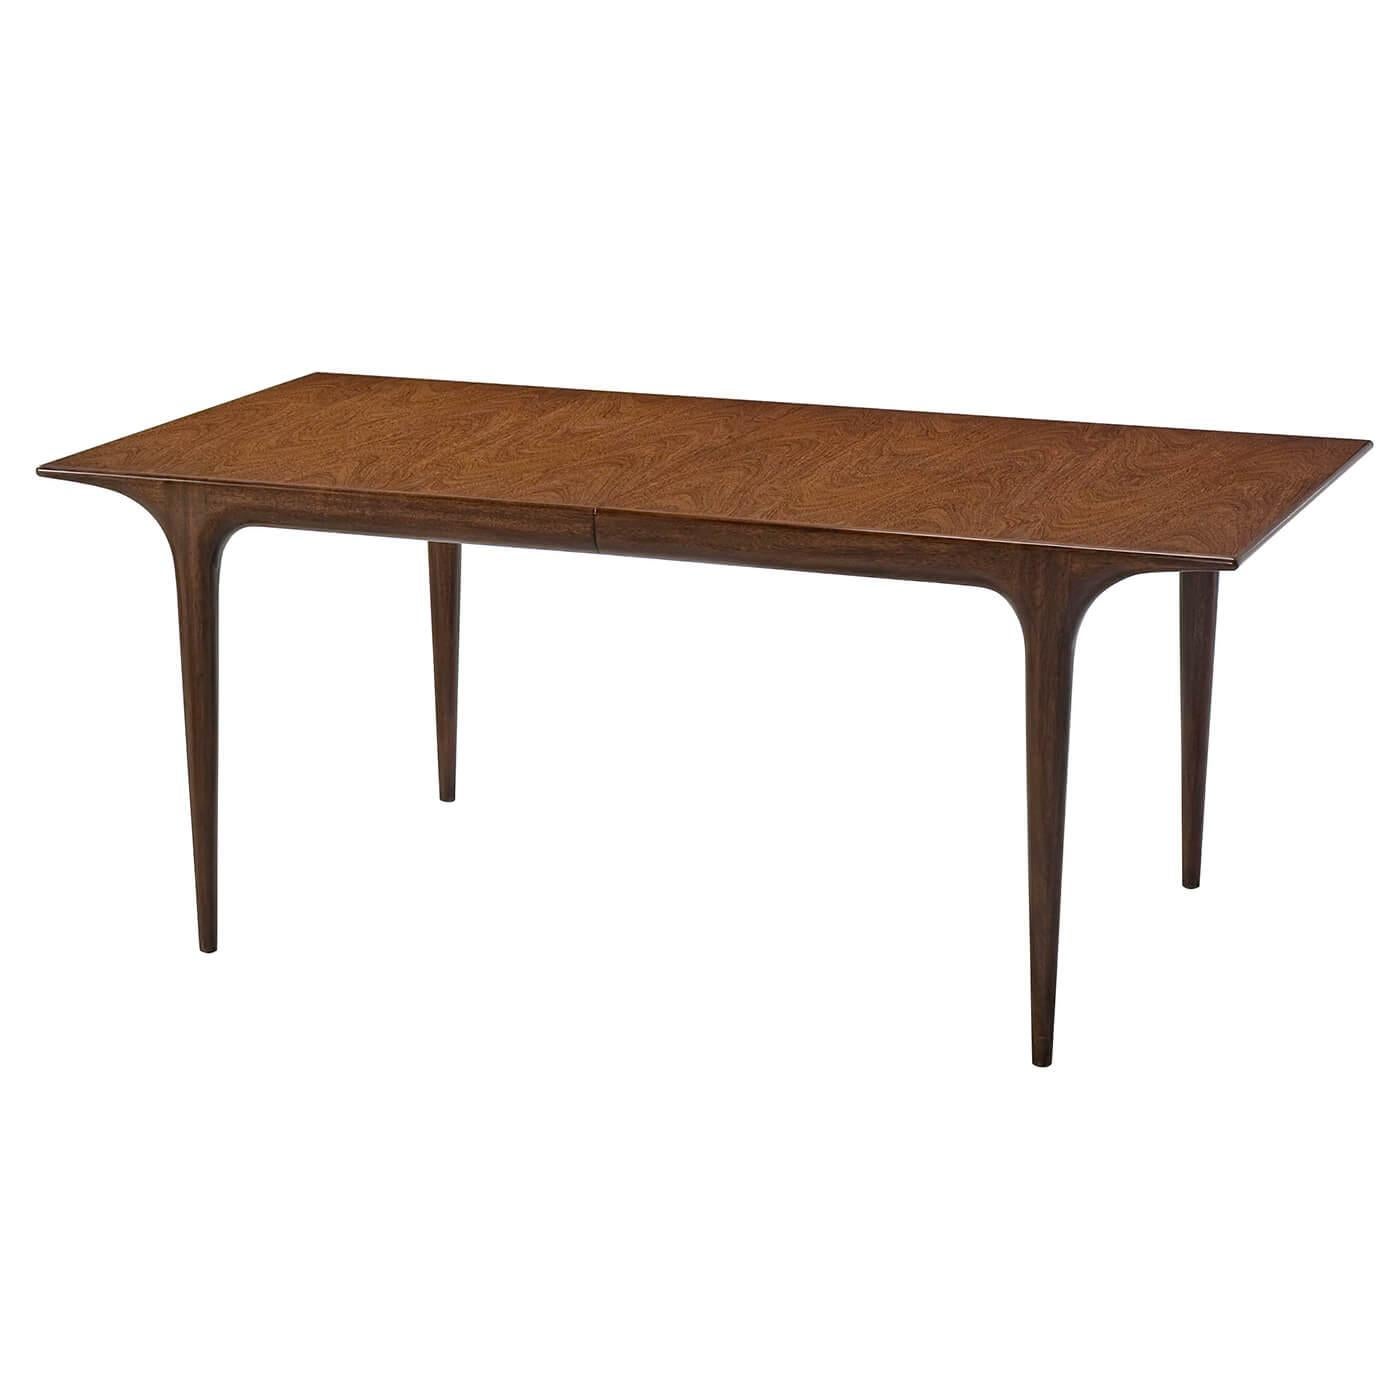 Mid-Century Modern style extension dining table with Sucopira veneer and mahogany with two extension leaves.

Open dimensions: 96